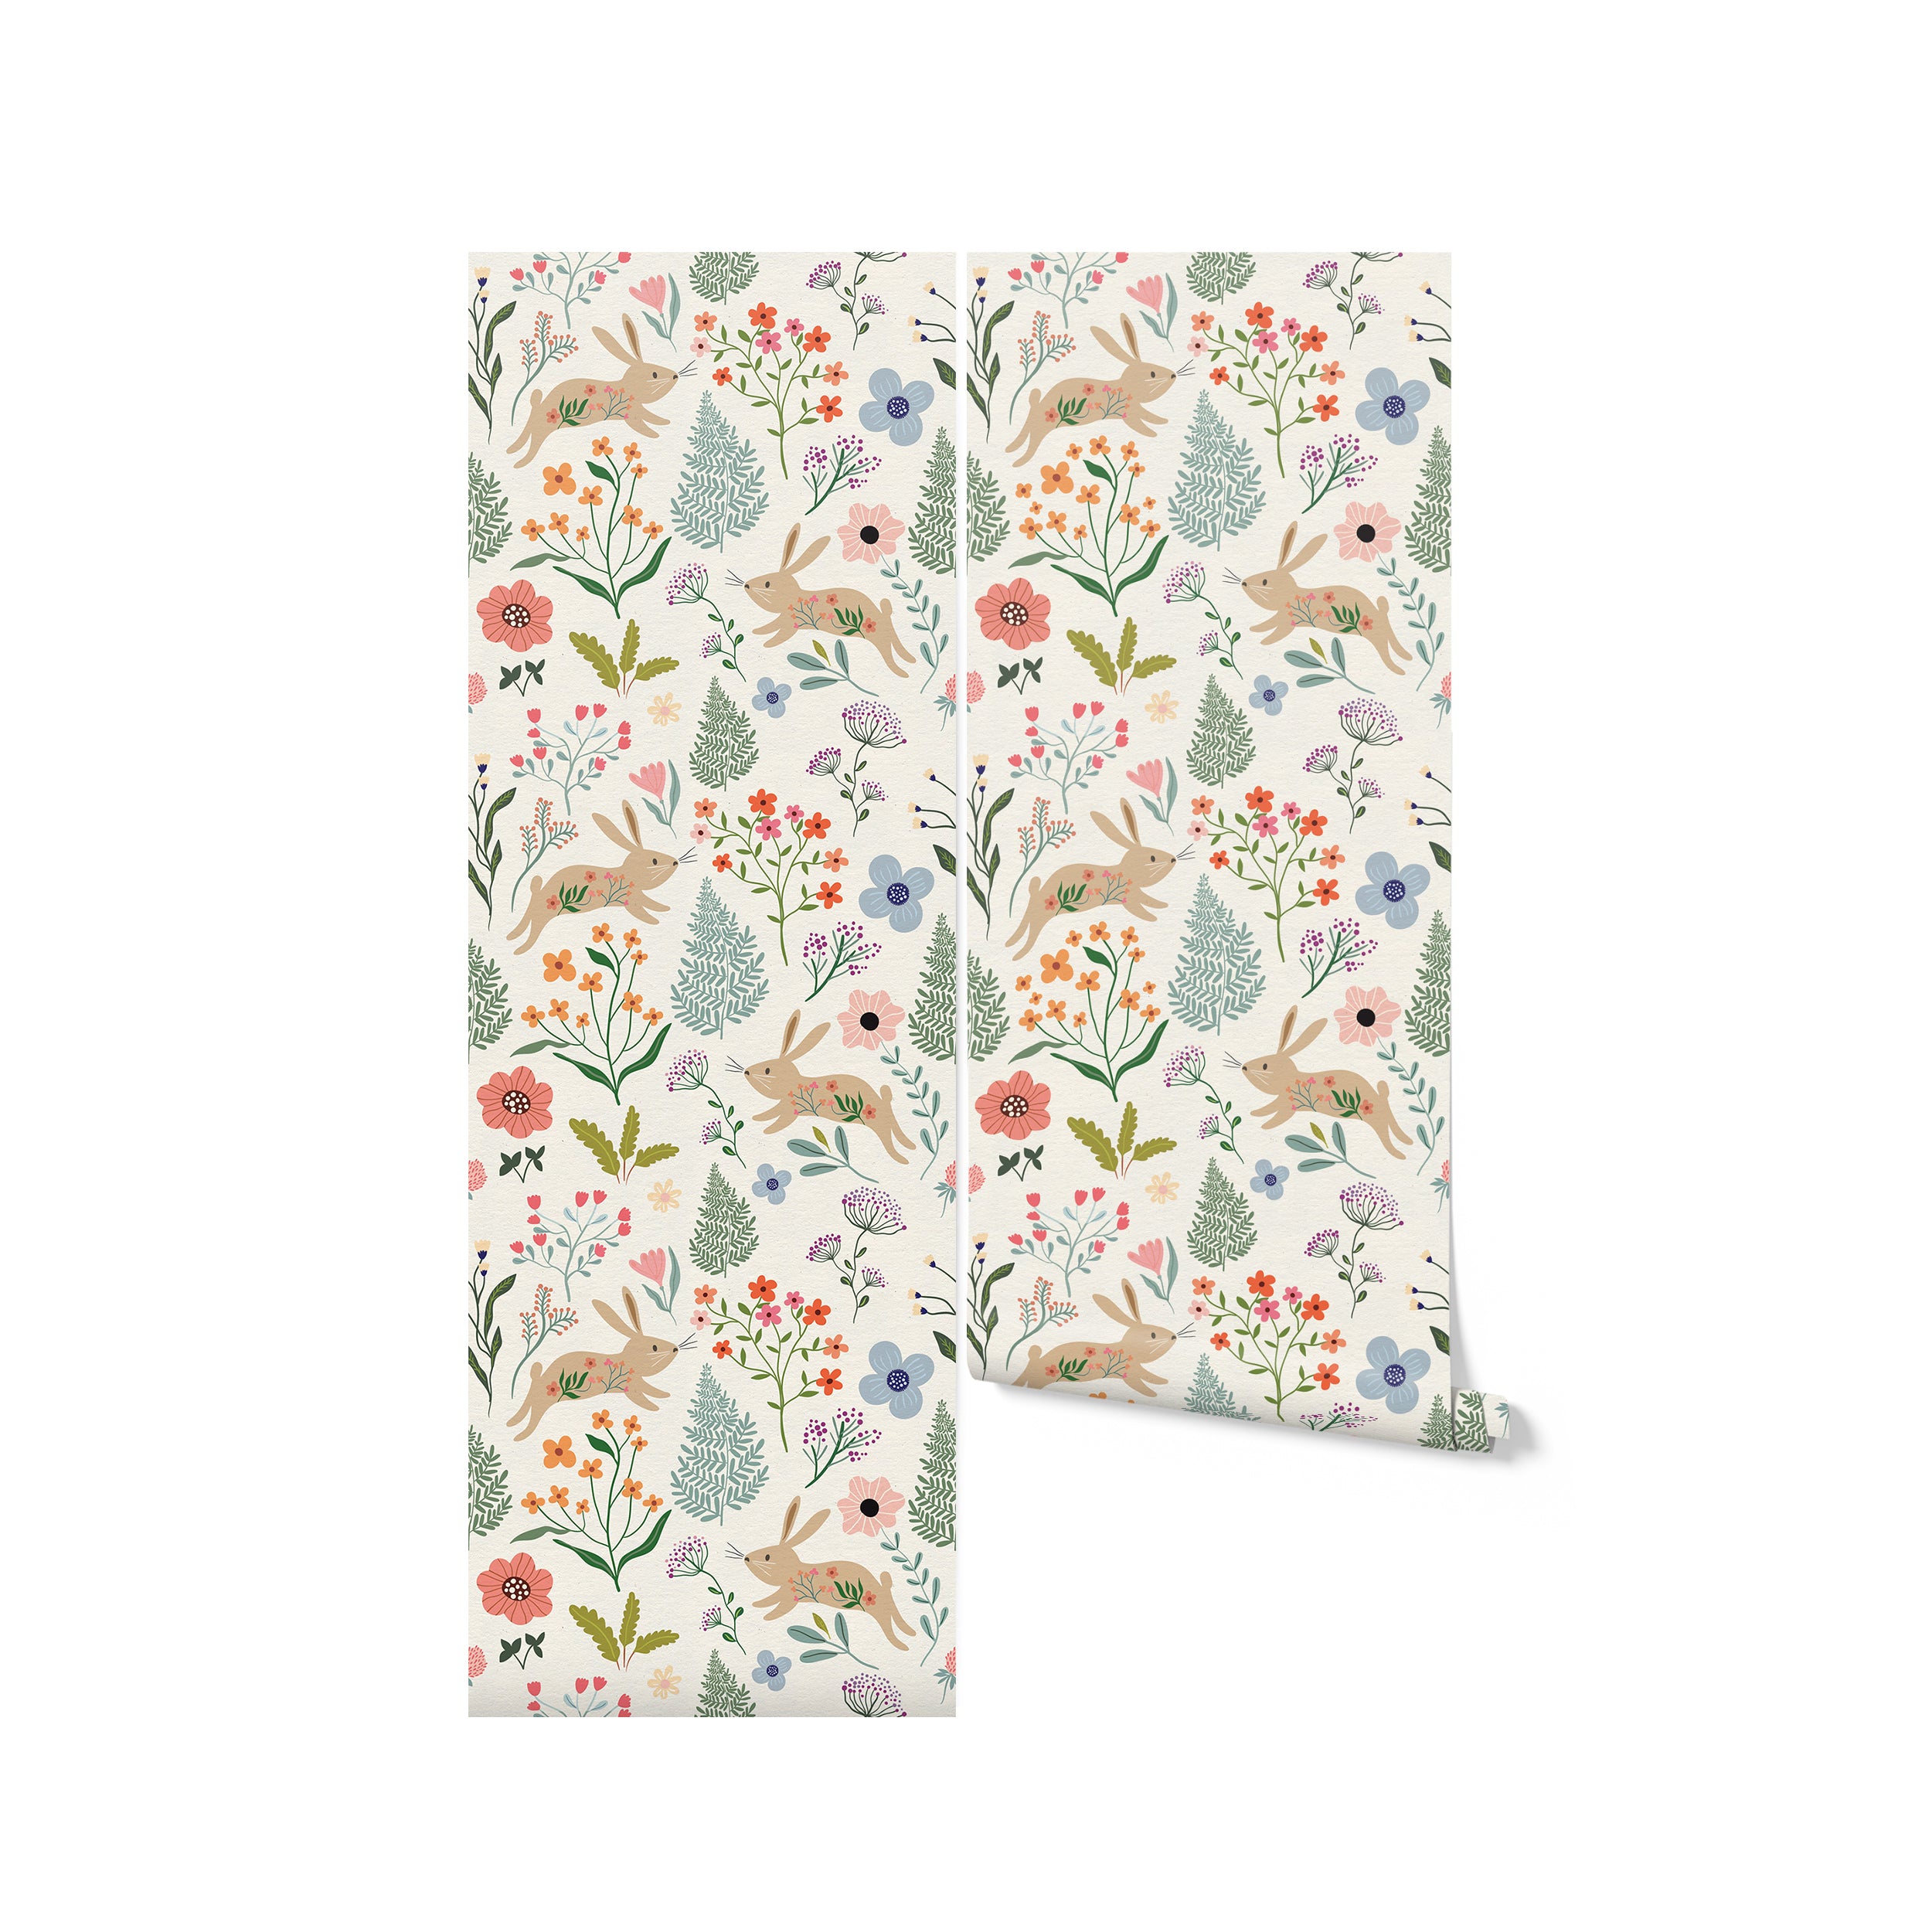 A rolled-up view of Colourful Spring Bunnies Wallpaper displaying a charming pattern of leaping bunnies surrounded by vibrant spring flowers and foliage on a neutral background, perfect for adding a playful yet soothing touch to interiors.